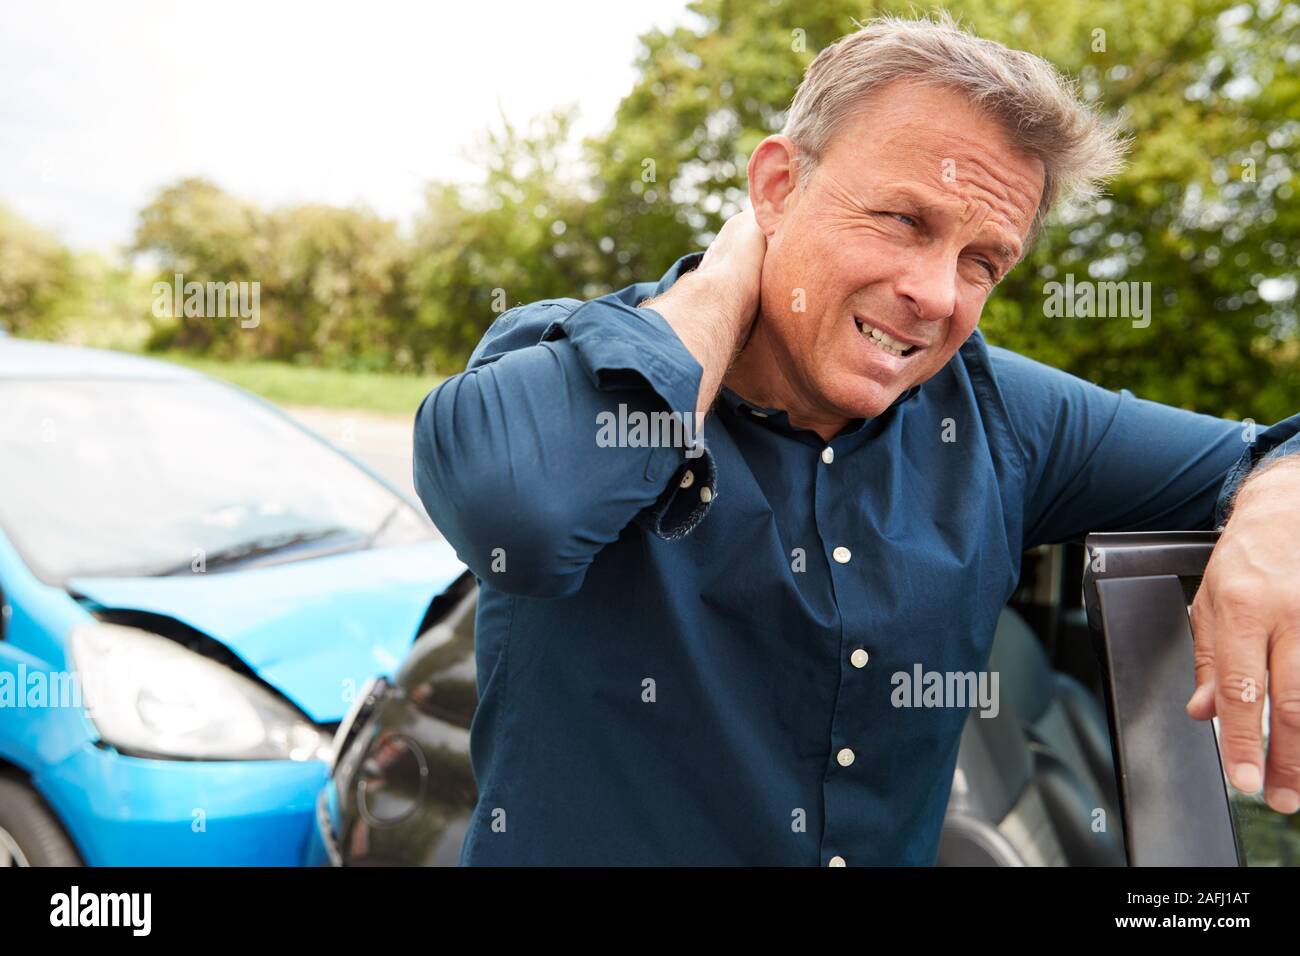 Mature Male Motorist With Whiplash Injury In Car Crash Getting Out Of Vehicle Stock Photo